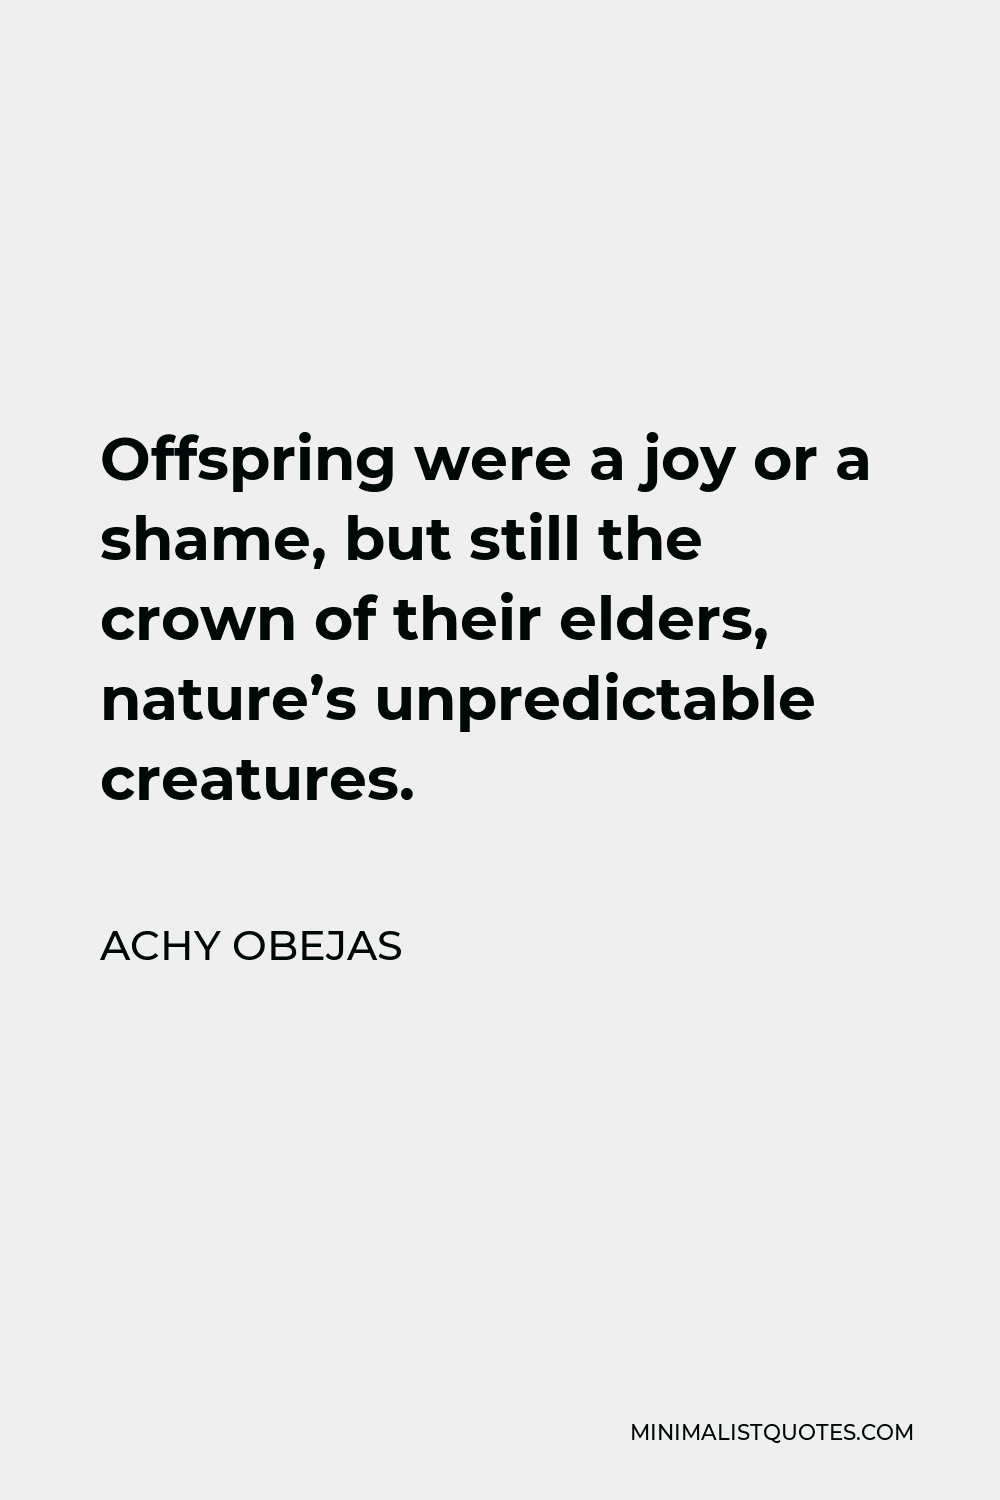 Achy Obejas Quote - Offspring were a joy or a shame, but still the crown of their elders, nature’s unpredictable creatures.